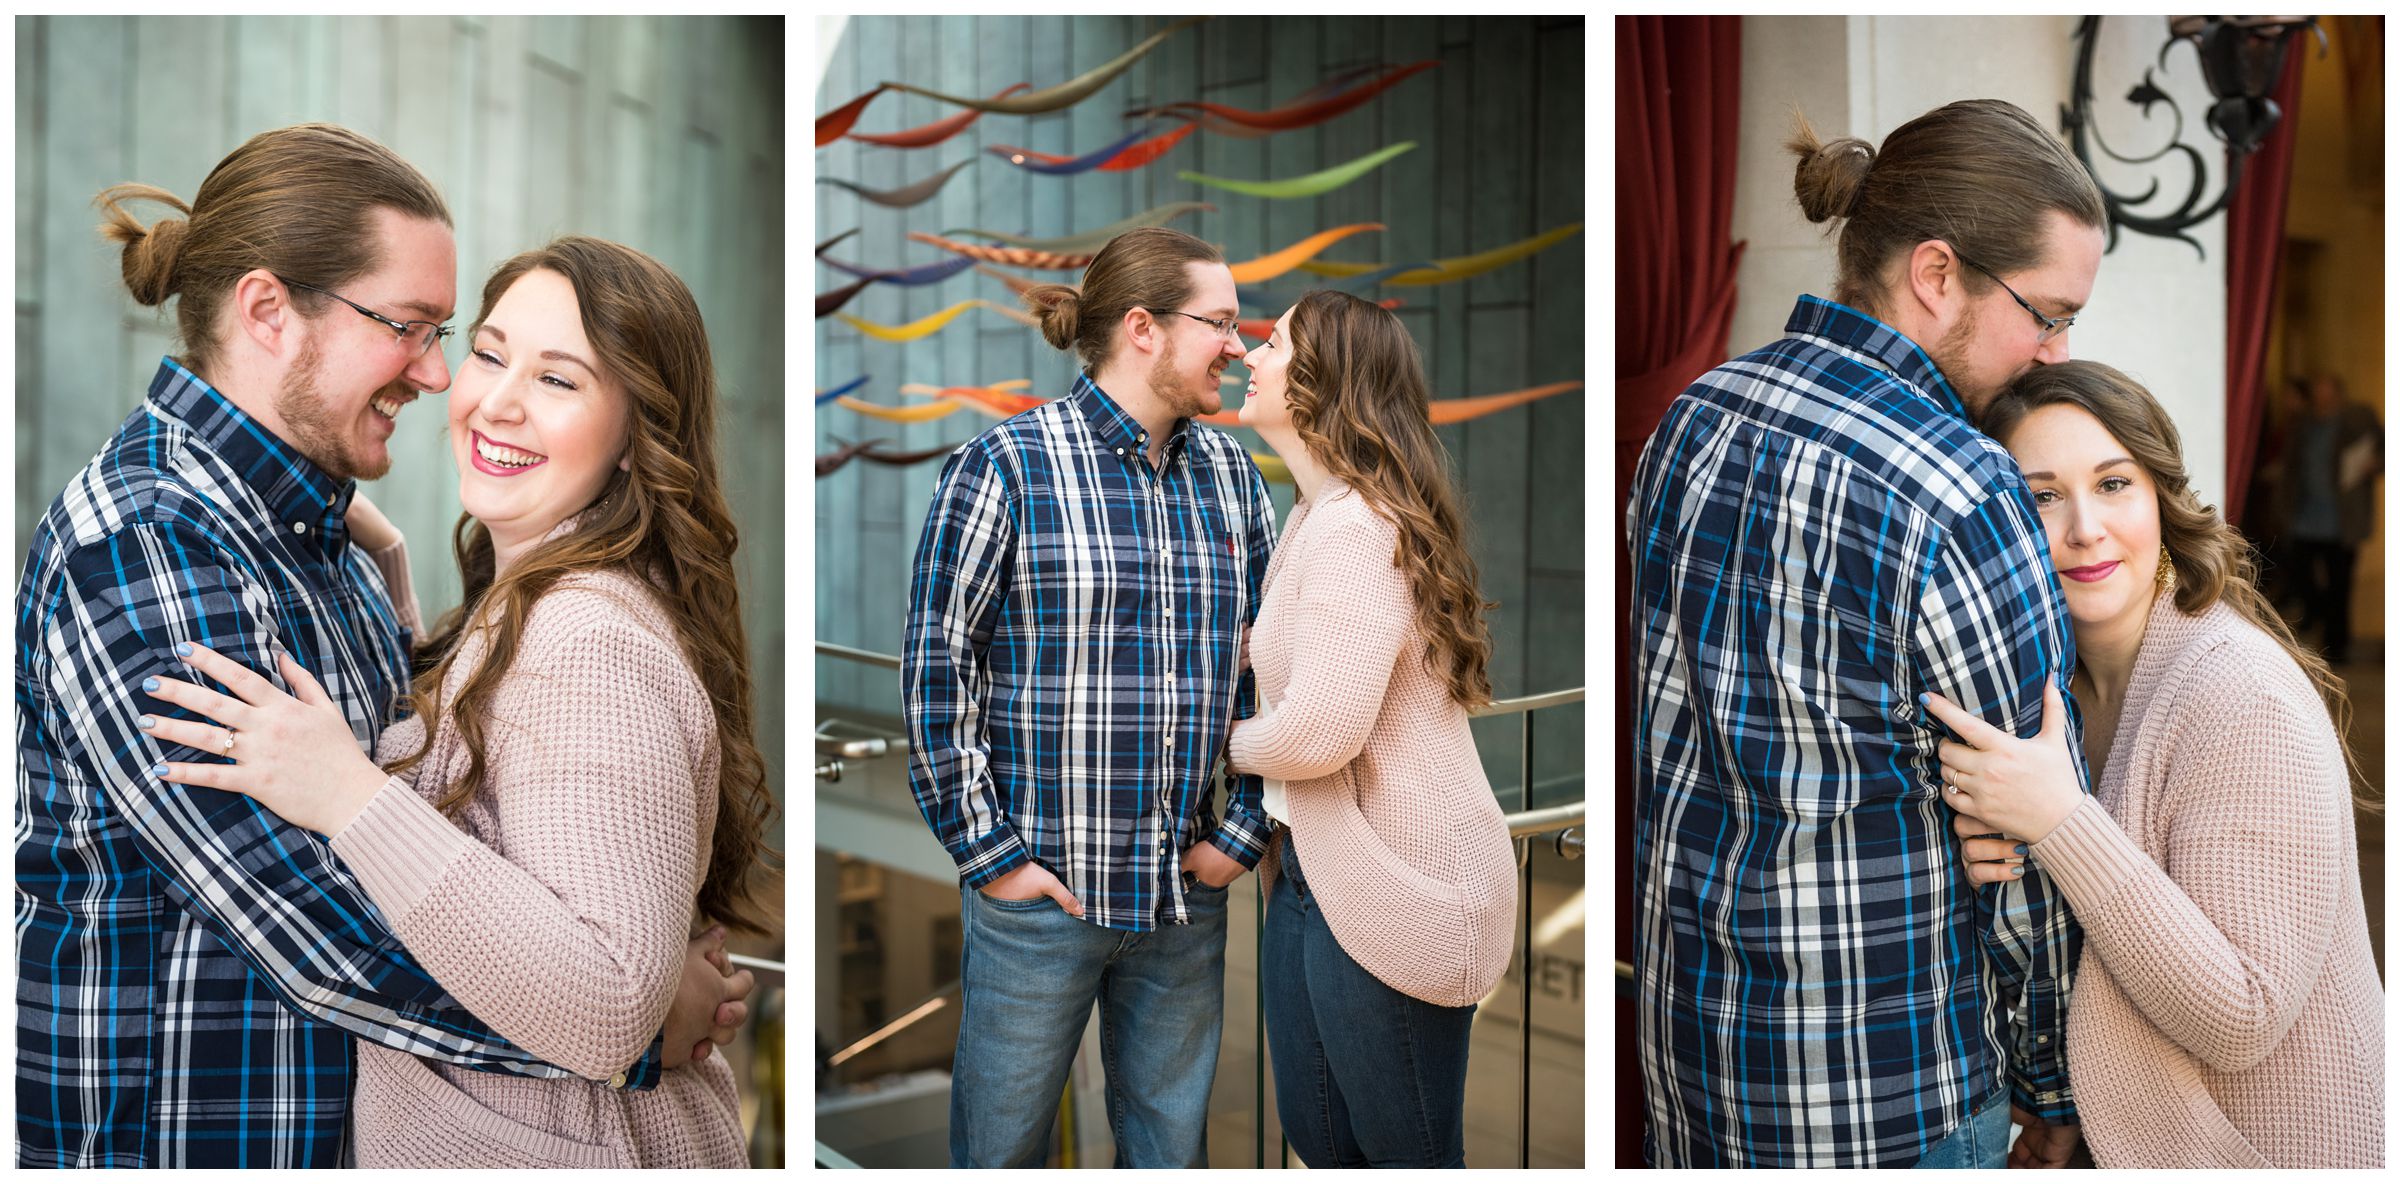 Winter indoor engagement session in the atrium of the Columbus Museum of Art surrounded by colorful hanging glass artwork.